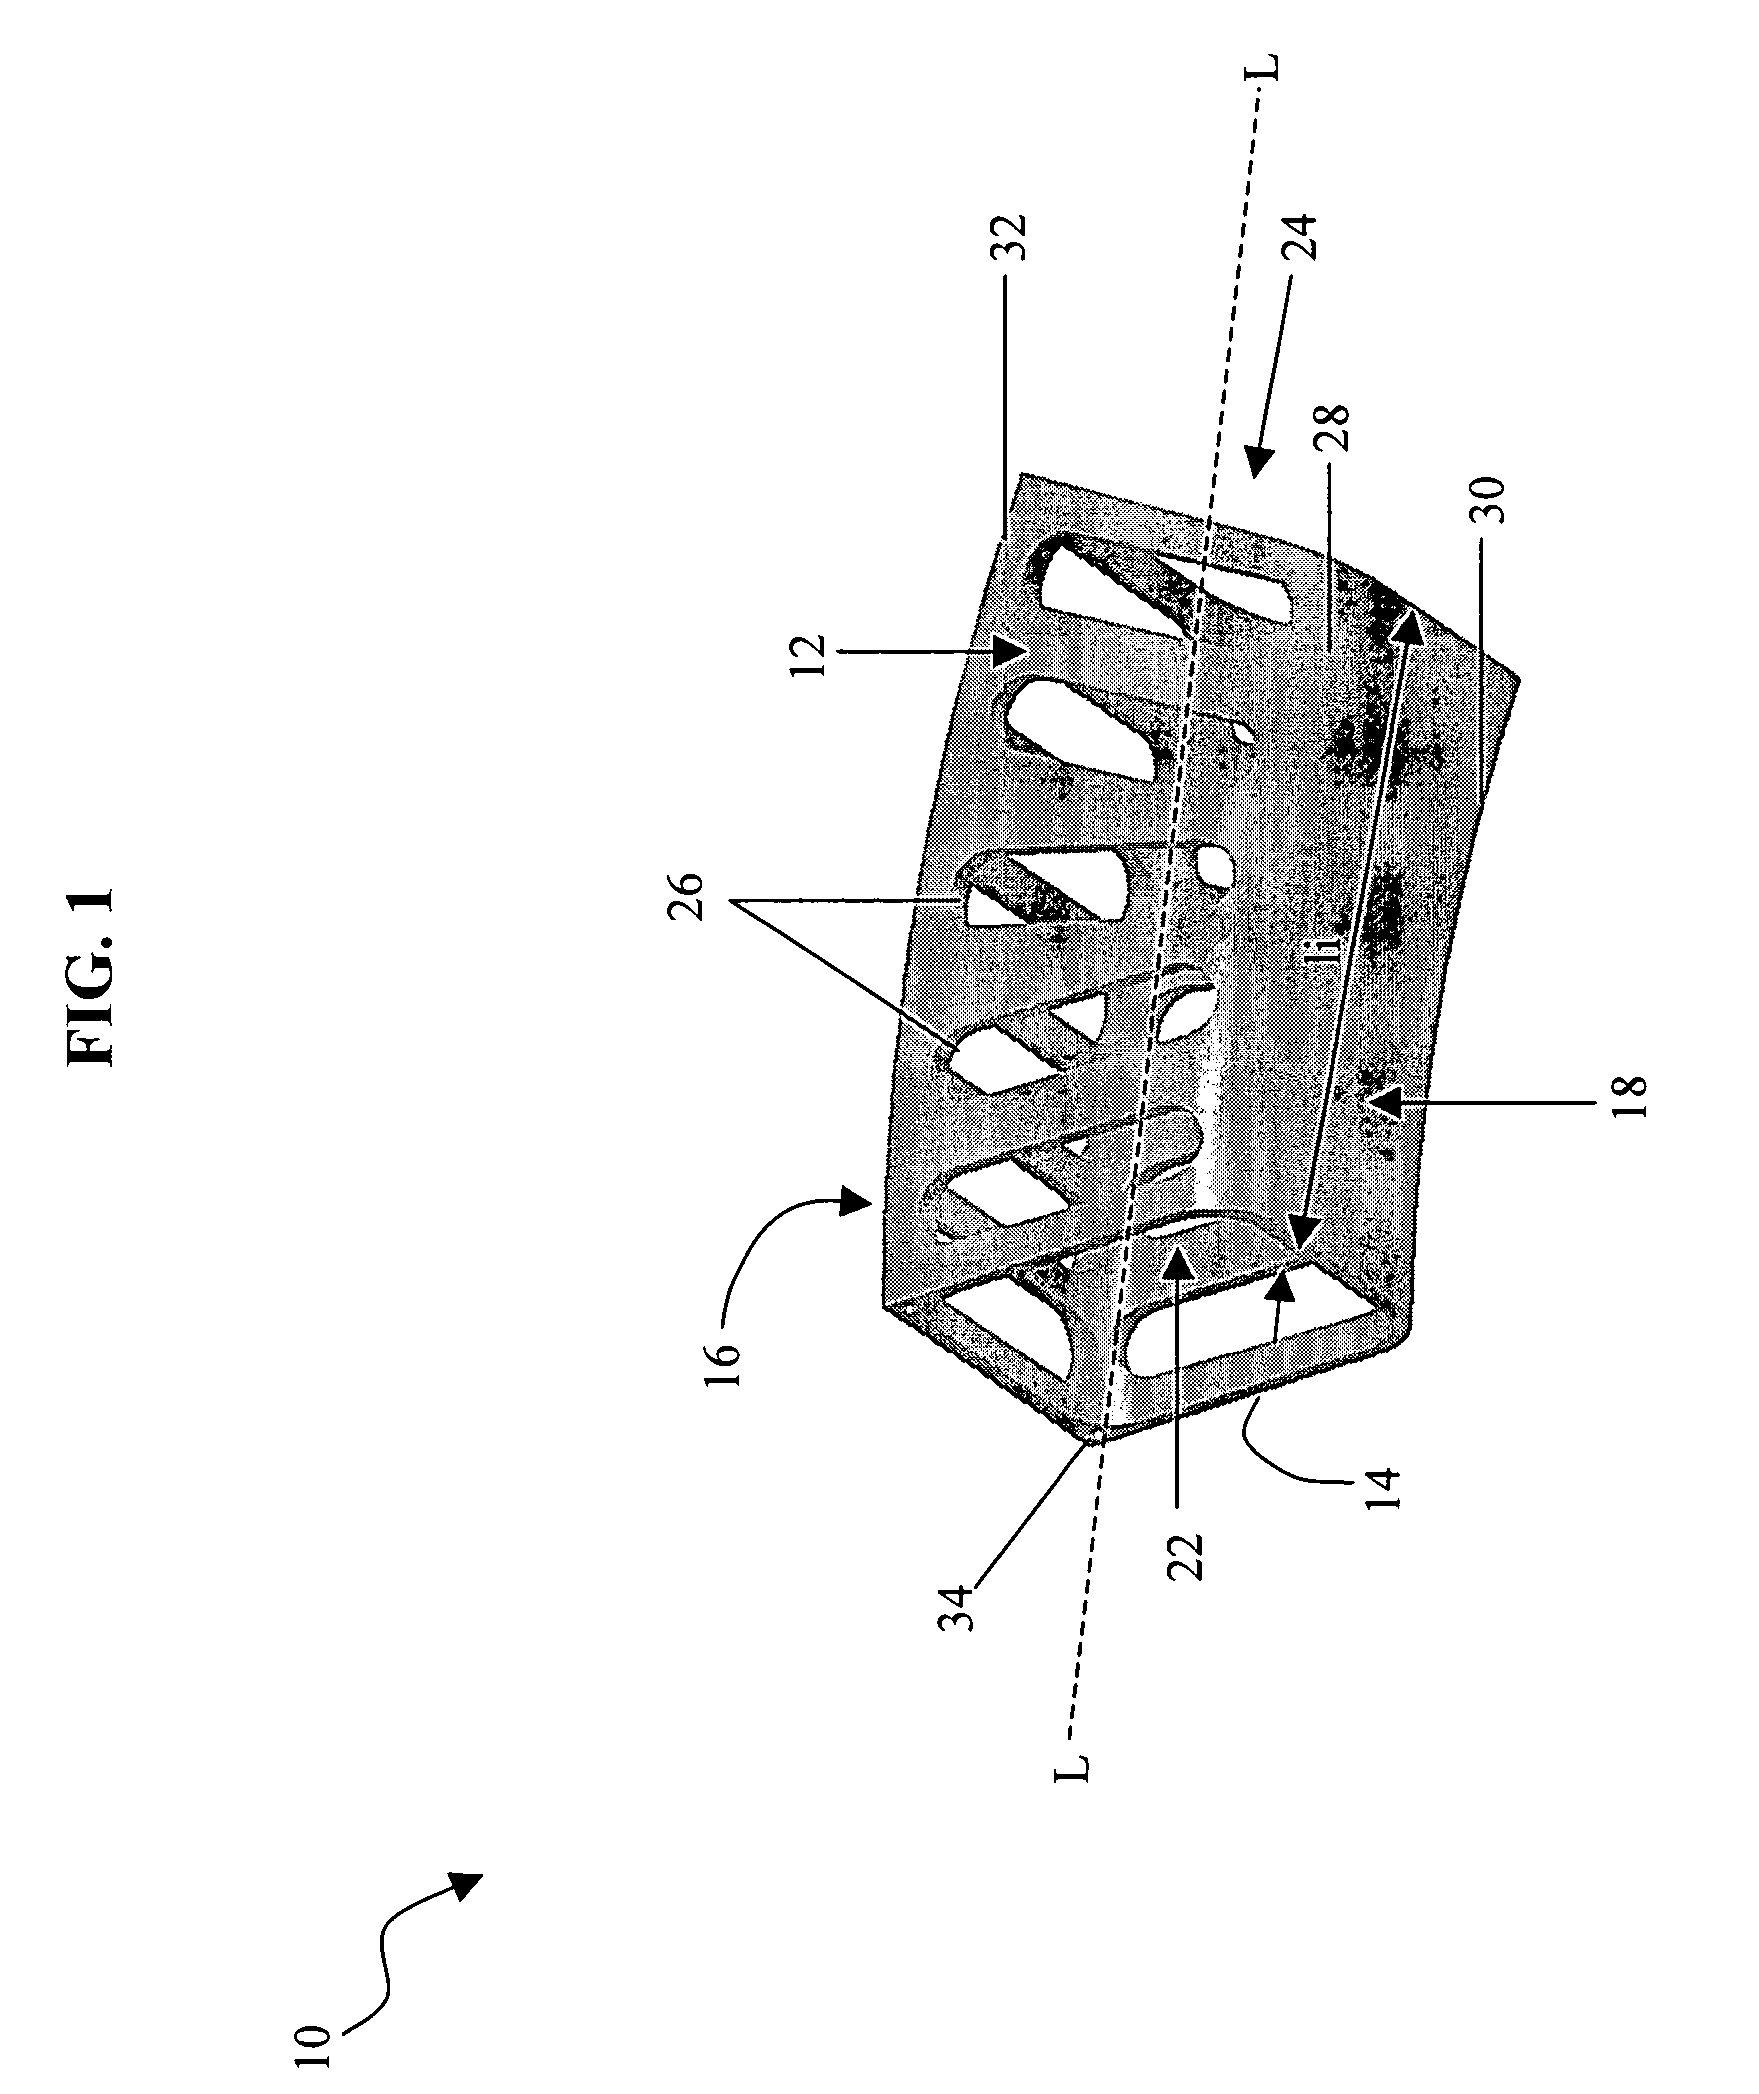 Method for implanting a laminoplasty